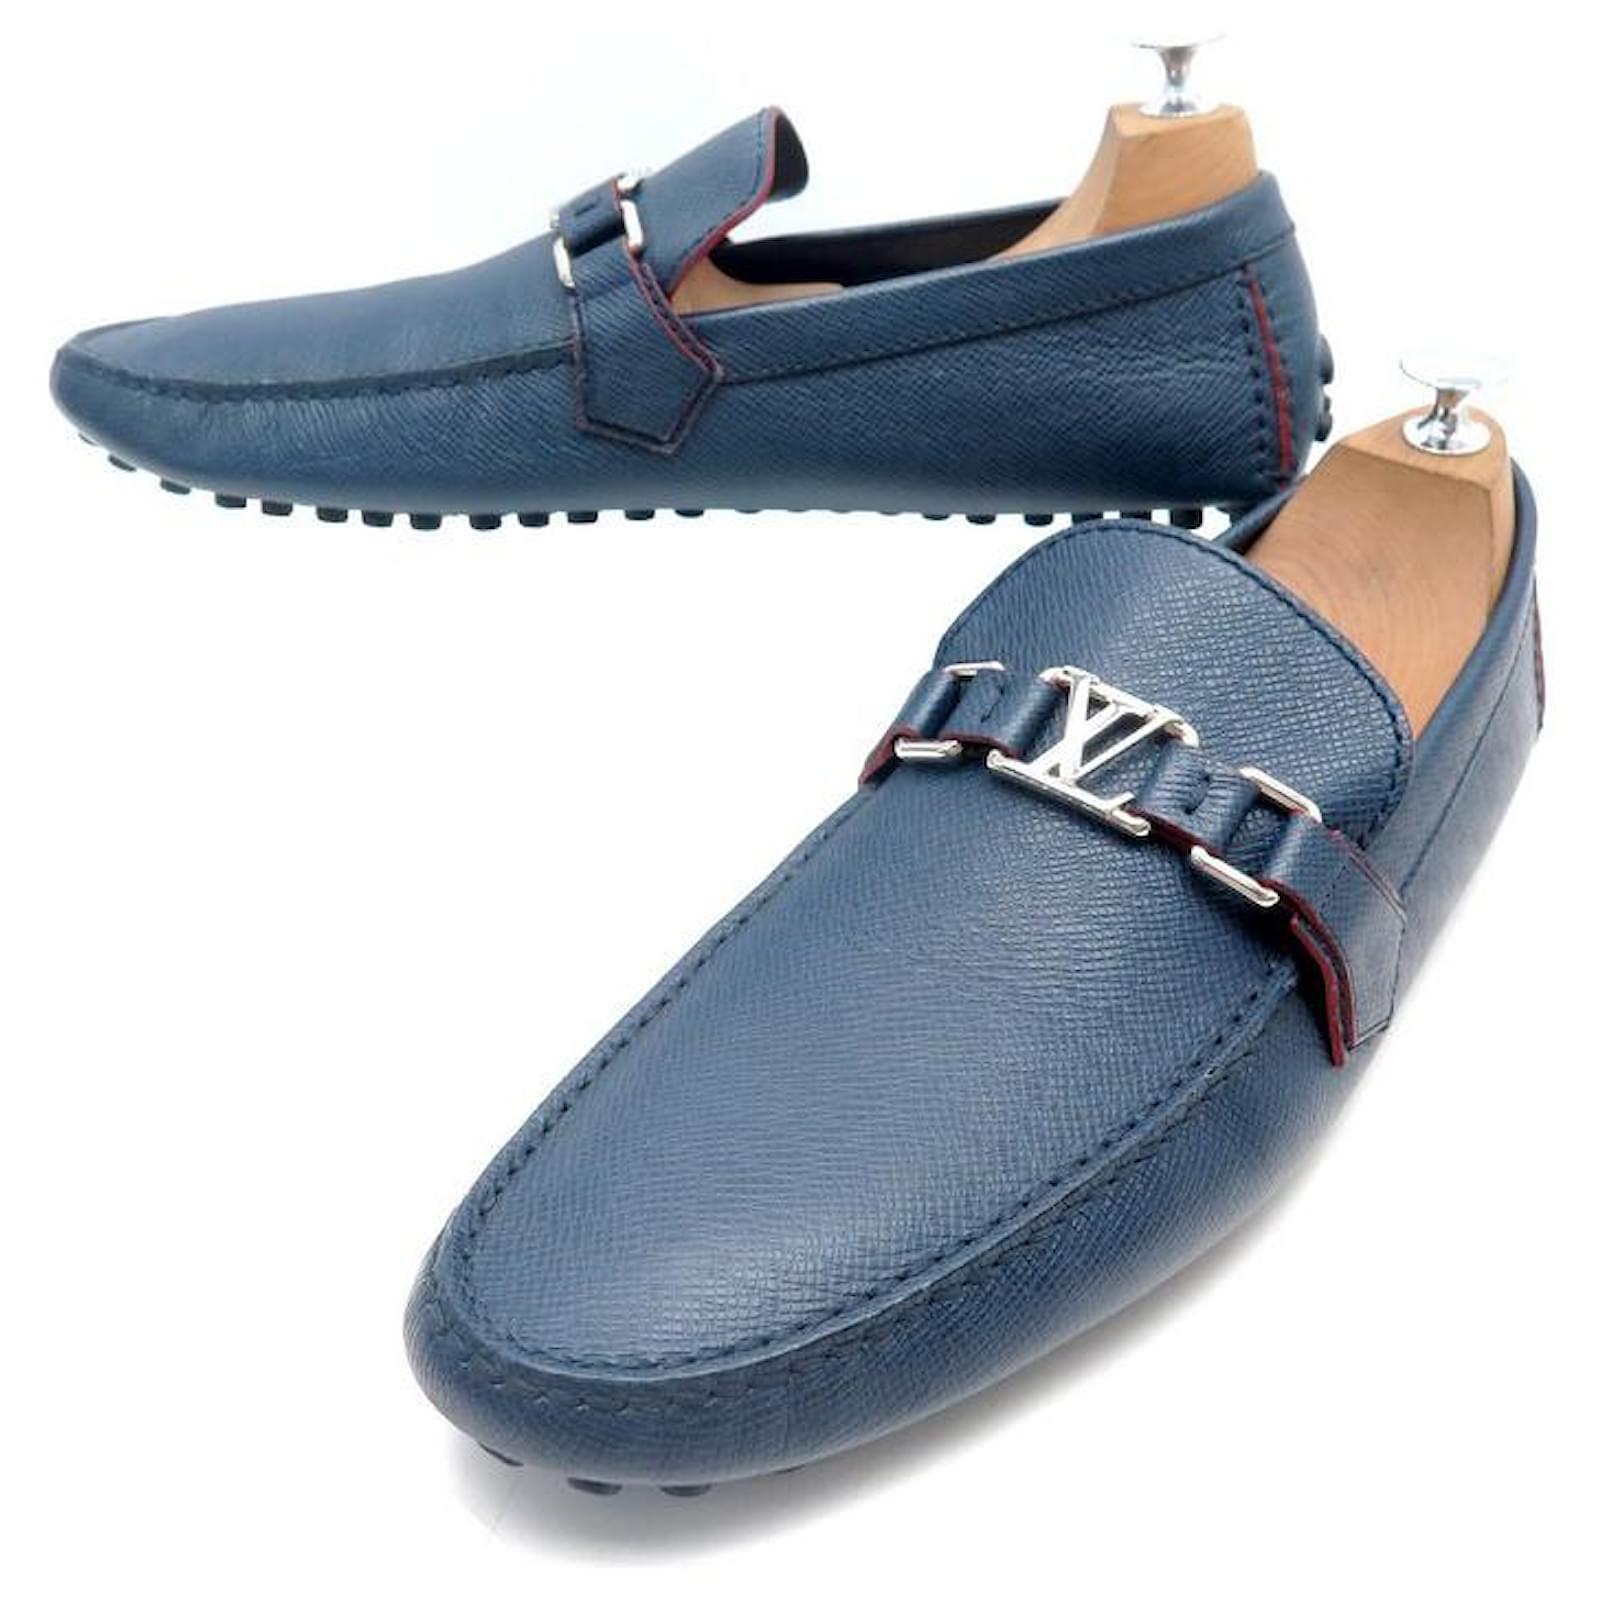 louis vuitton moccasin loafers